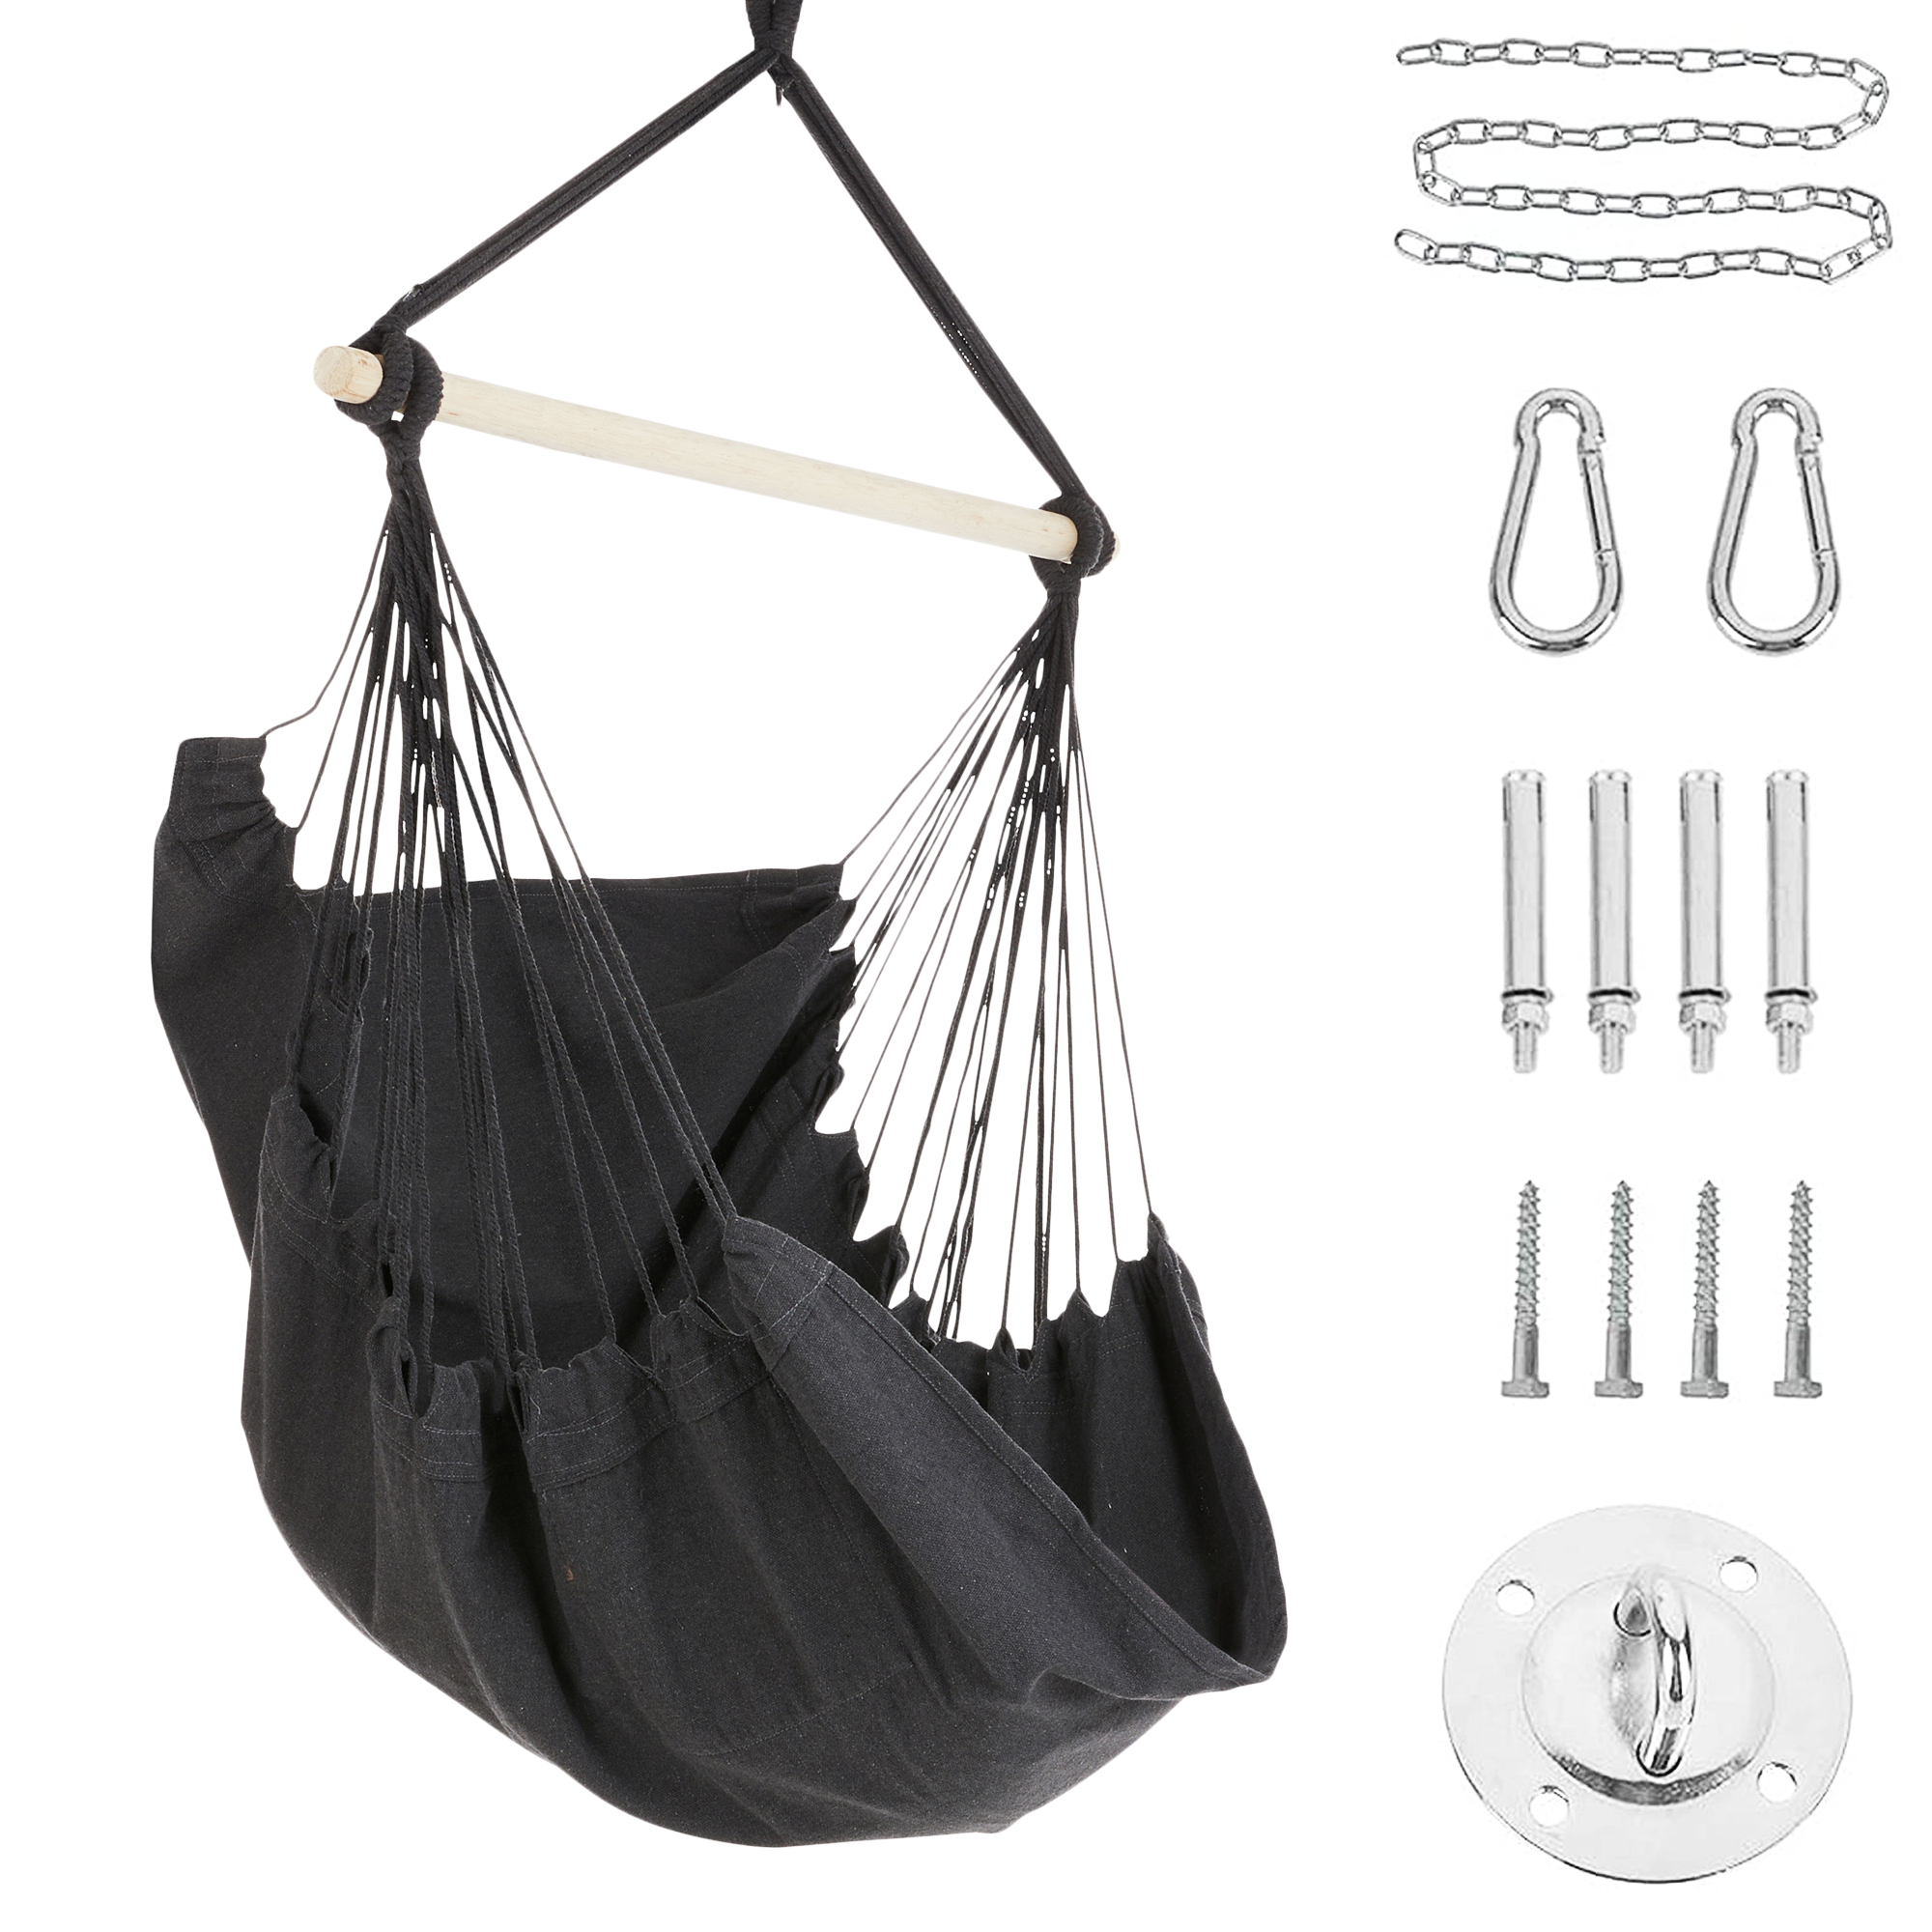 Project One Hanging Rope Hammock Chair, Hanging Rope Swing Seat with Carrying Bag, and Hardware Kit Perfect for Outdoor/Indoor Yard Deck Pat - Dark